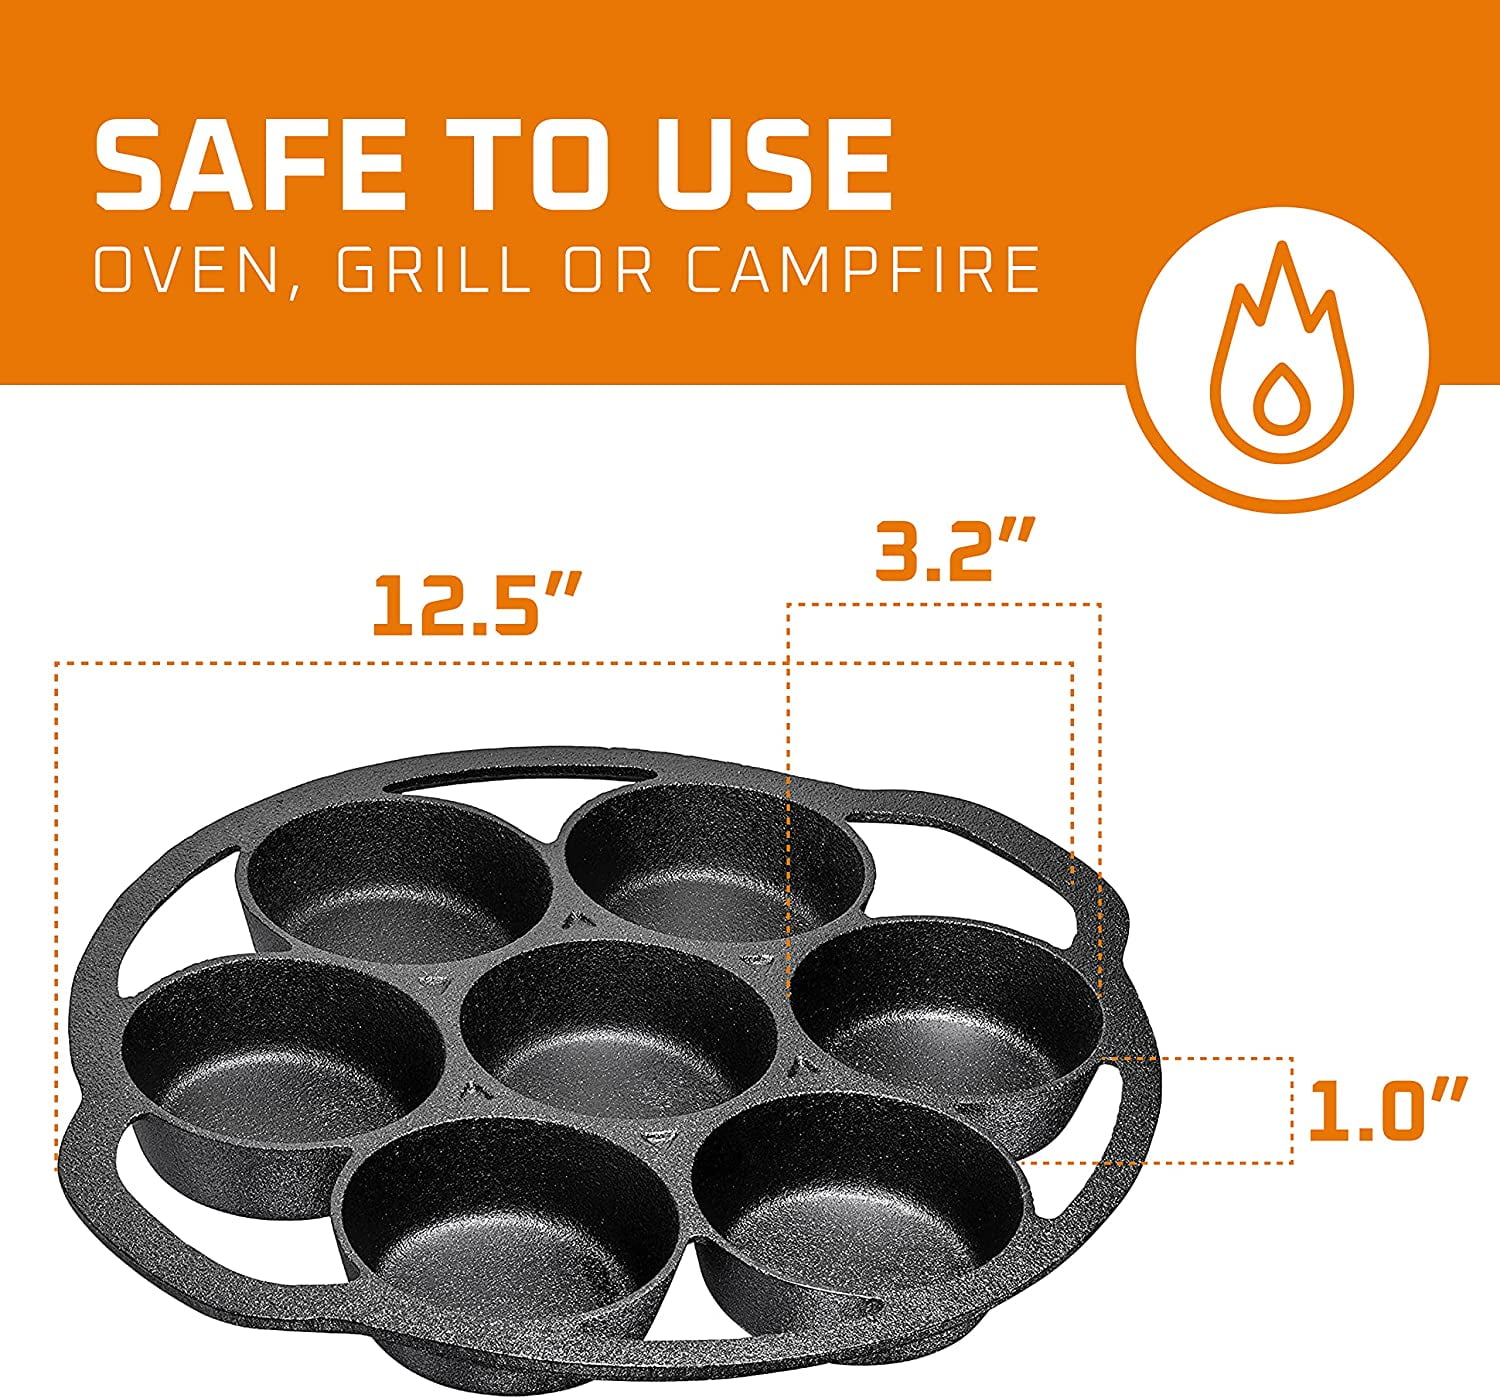 Symple Stuff Augu 7 Cup Cast Iron Muffin Pan with Lid & Reviews